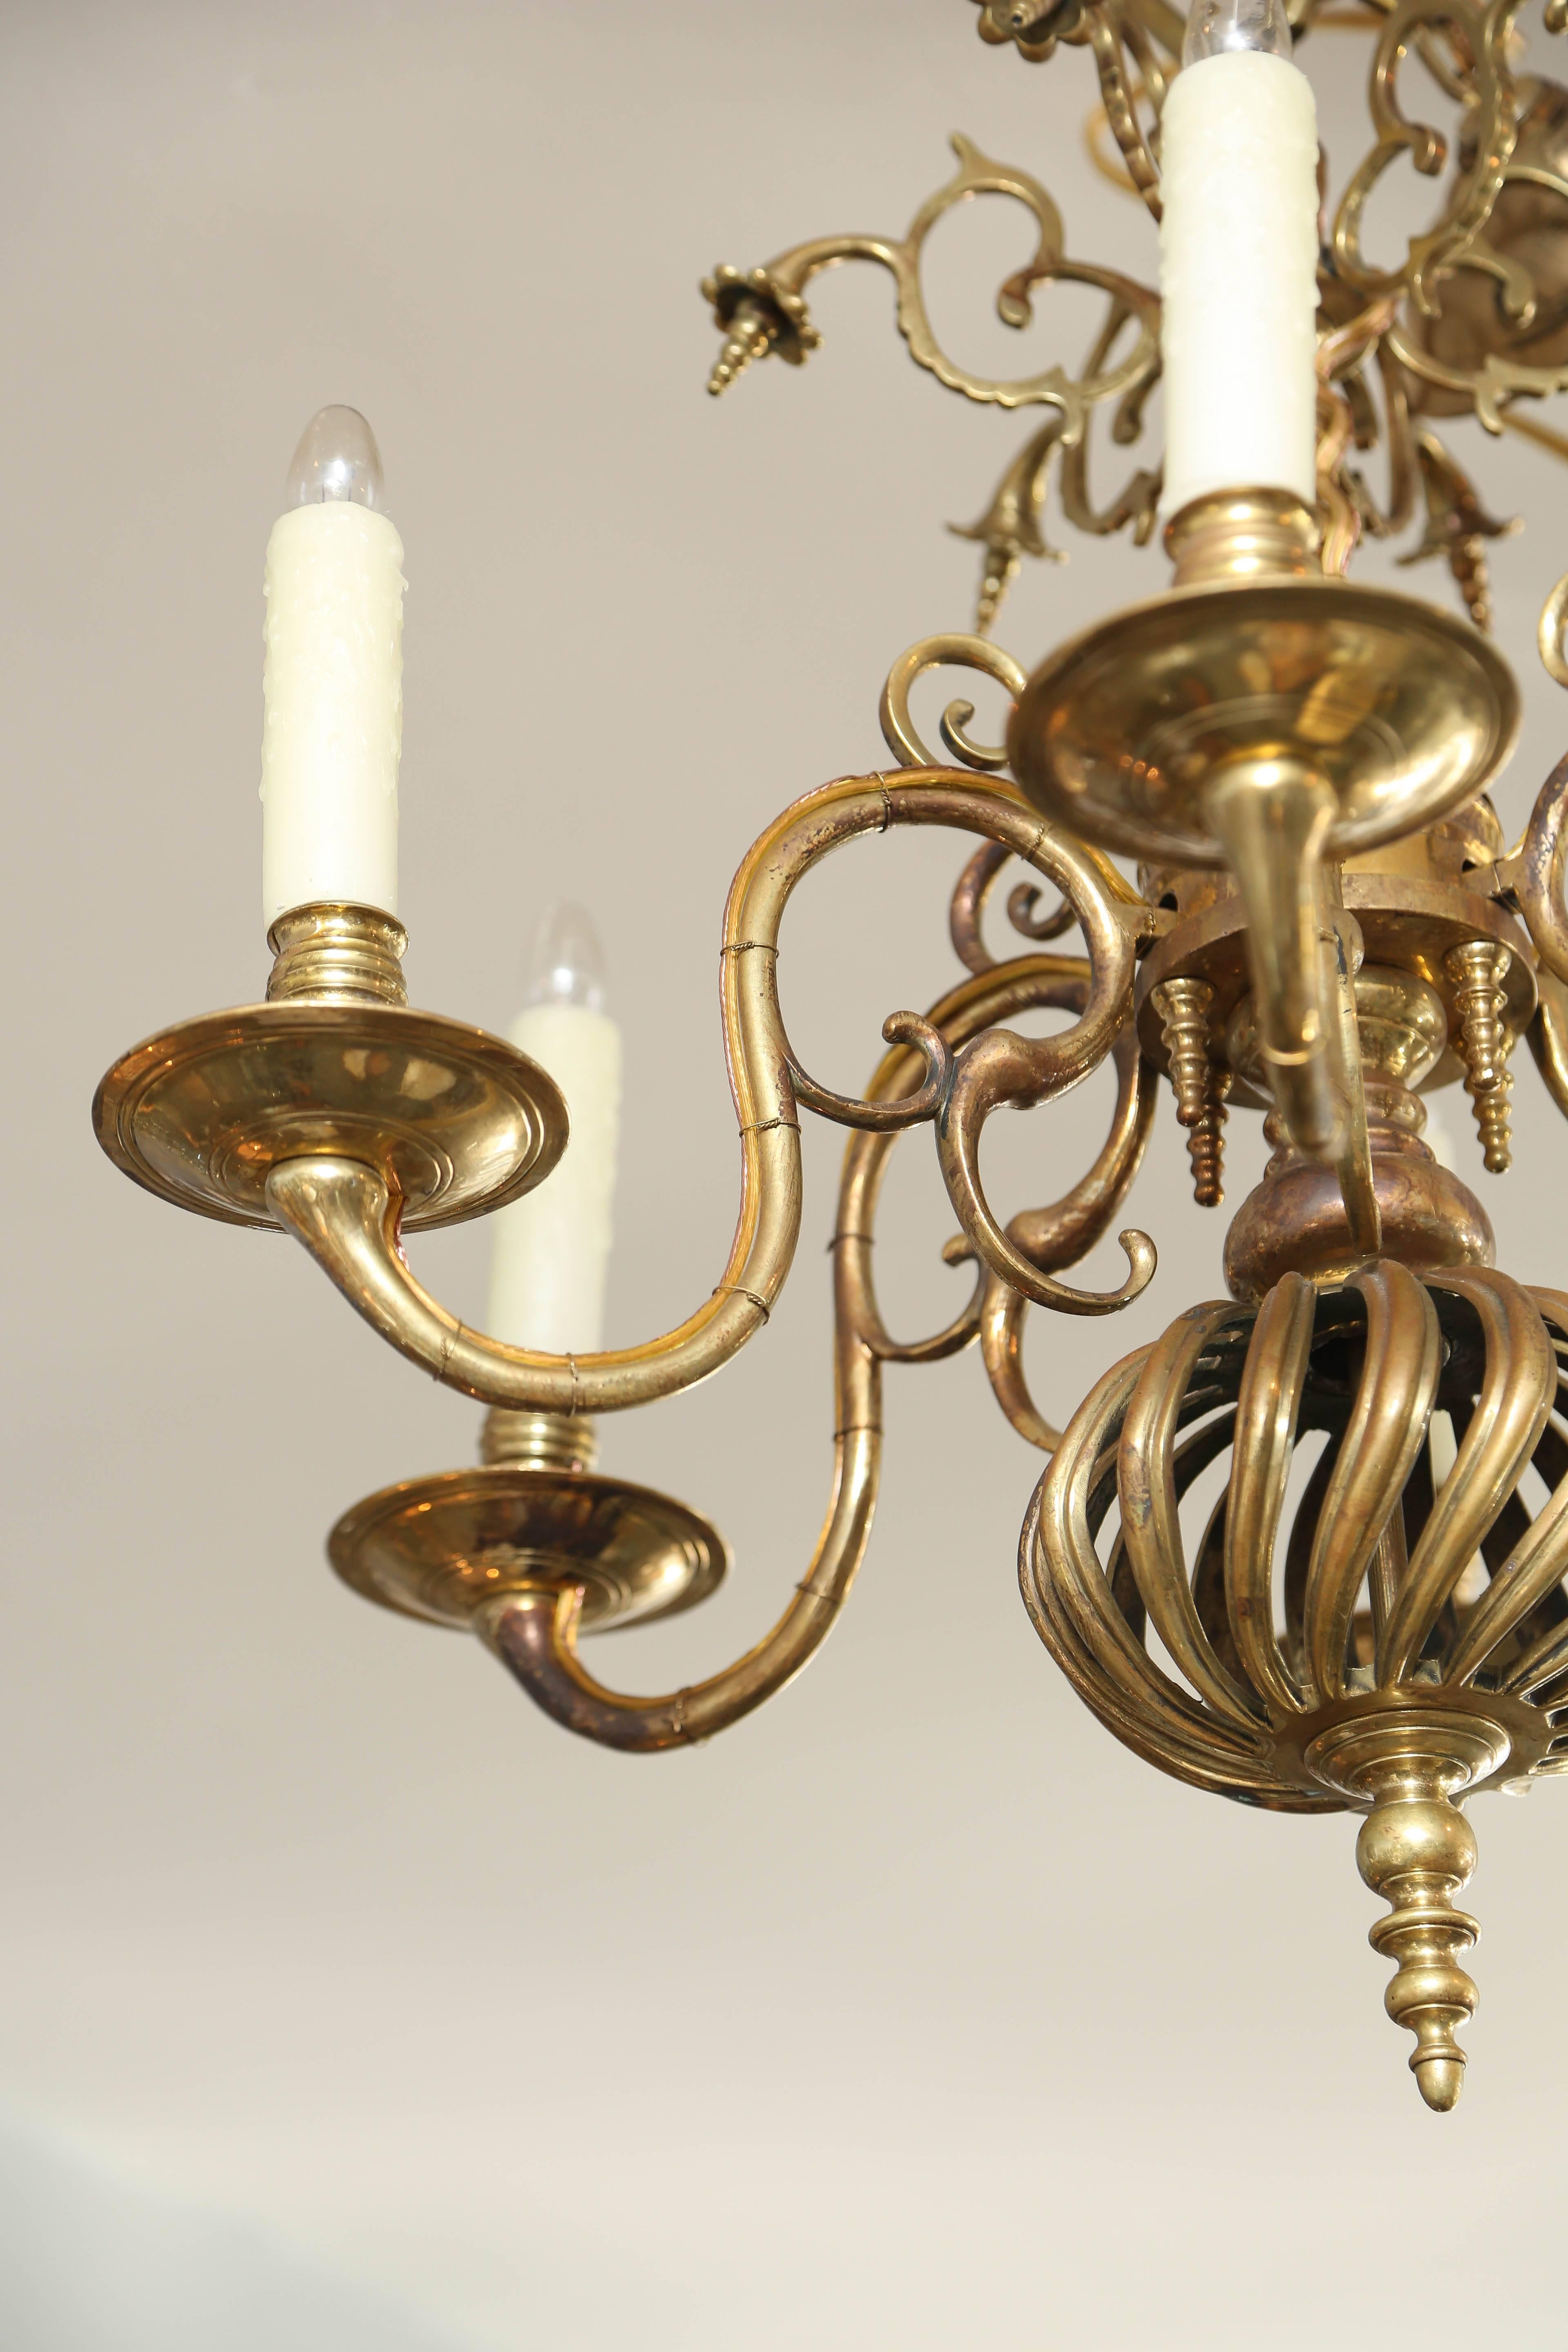 A finely and elegantly stylized period chandelier. 18th / 19th Century
With six lights originally for candles.